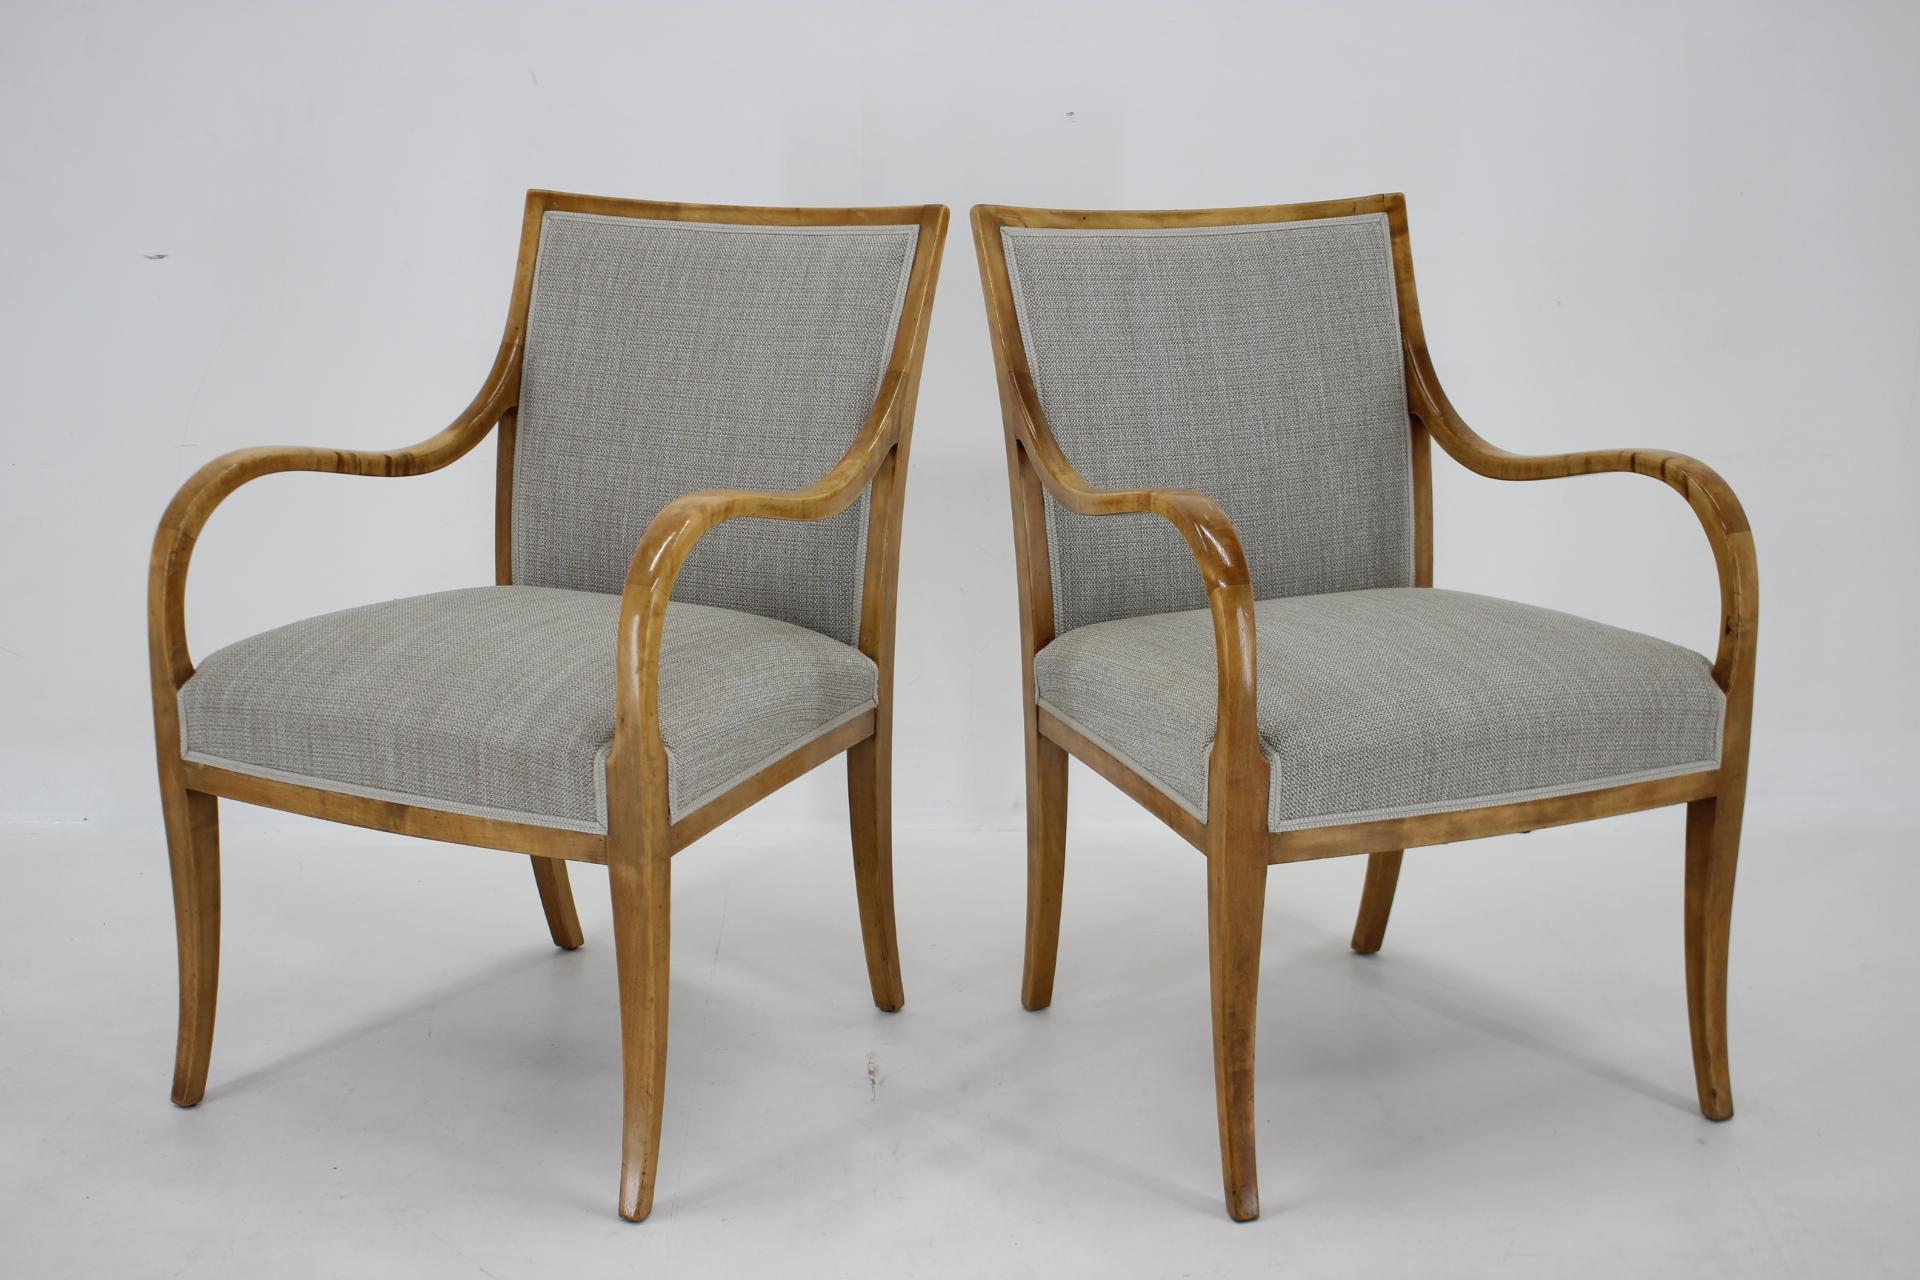 1950s Pair of Frits Henningsen Armchairs in Birch Wood, Denmark For Sale 2